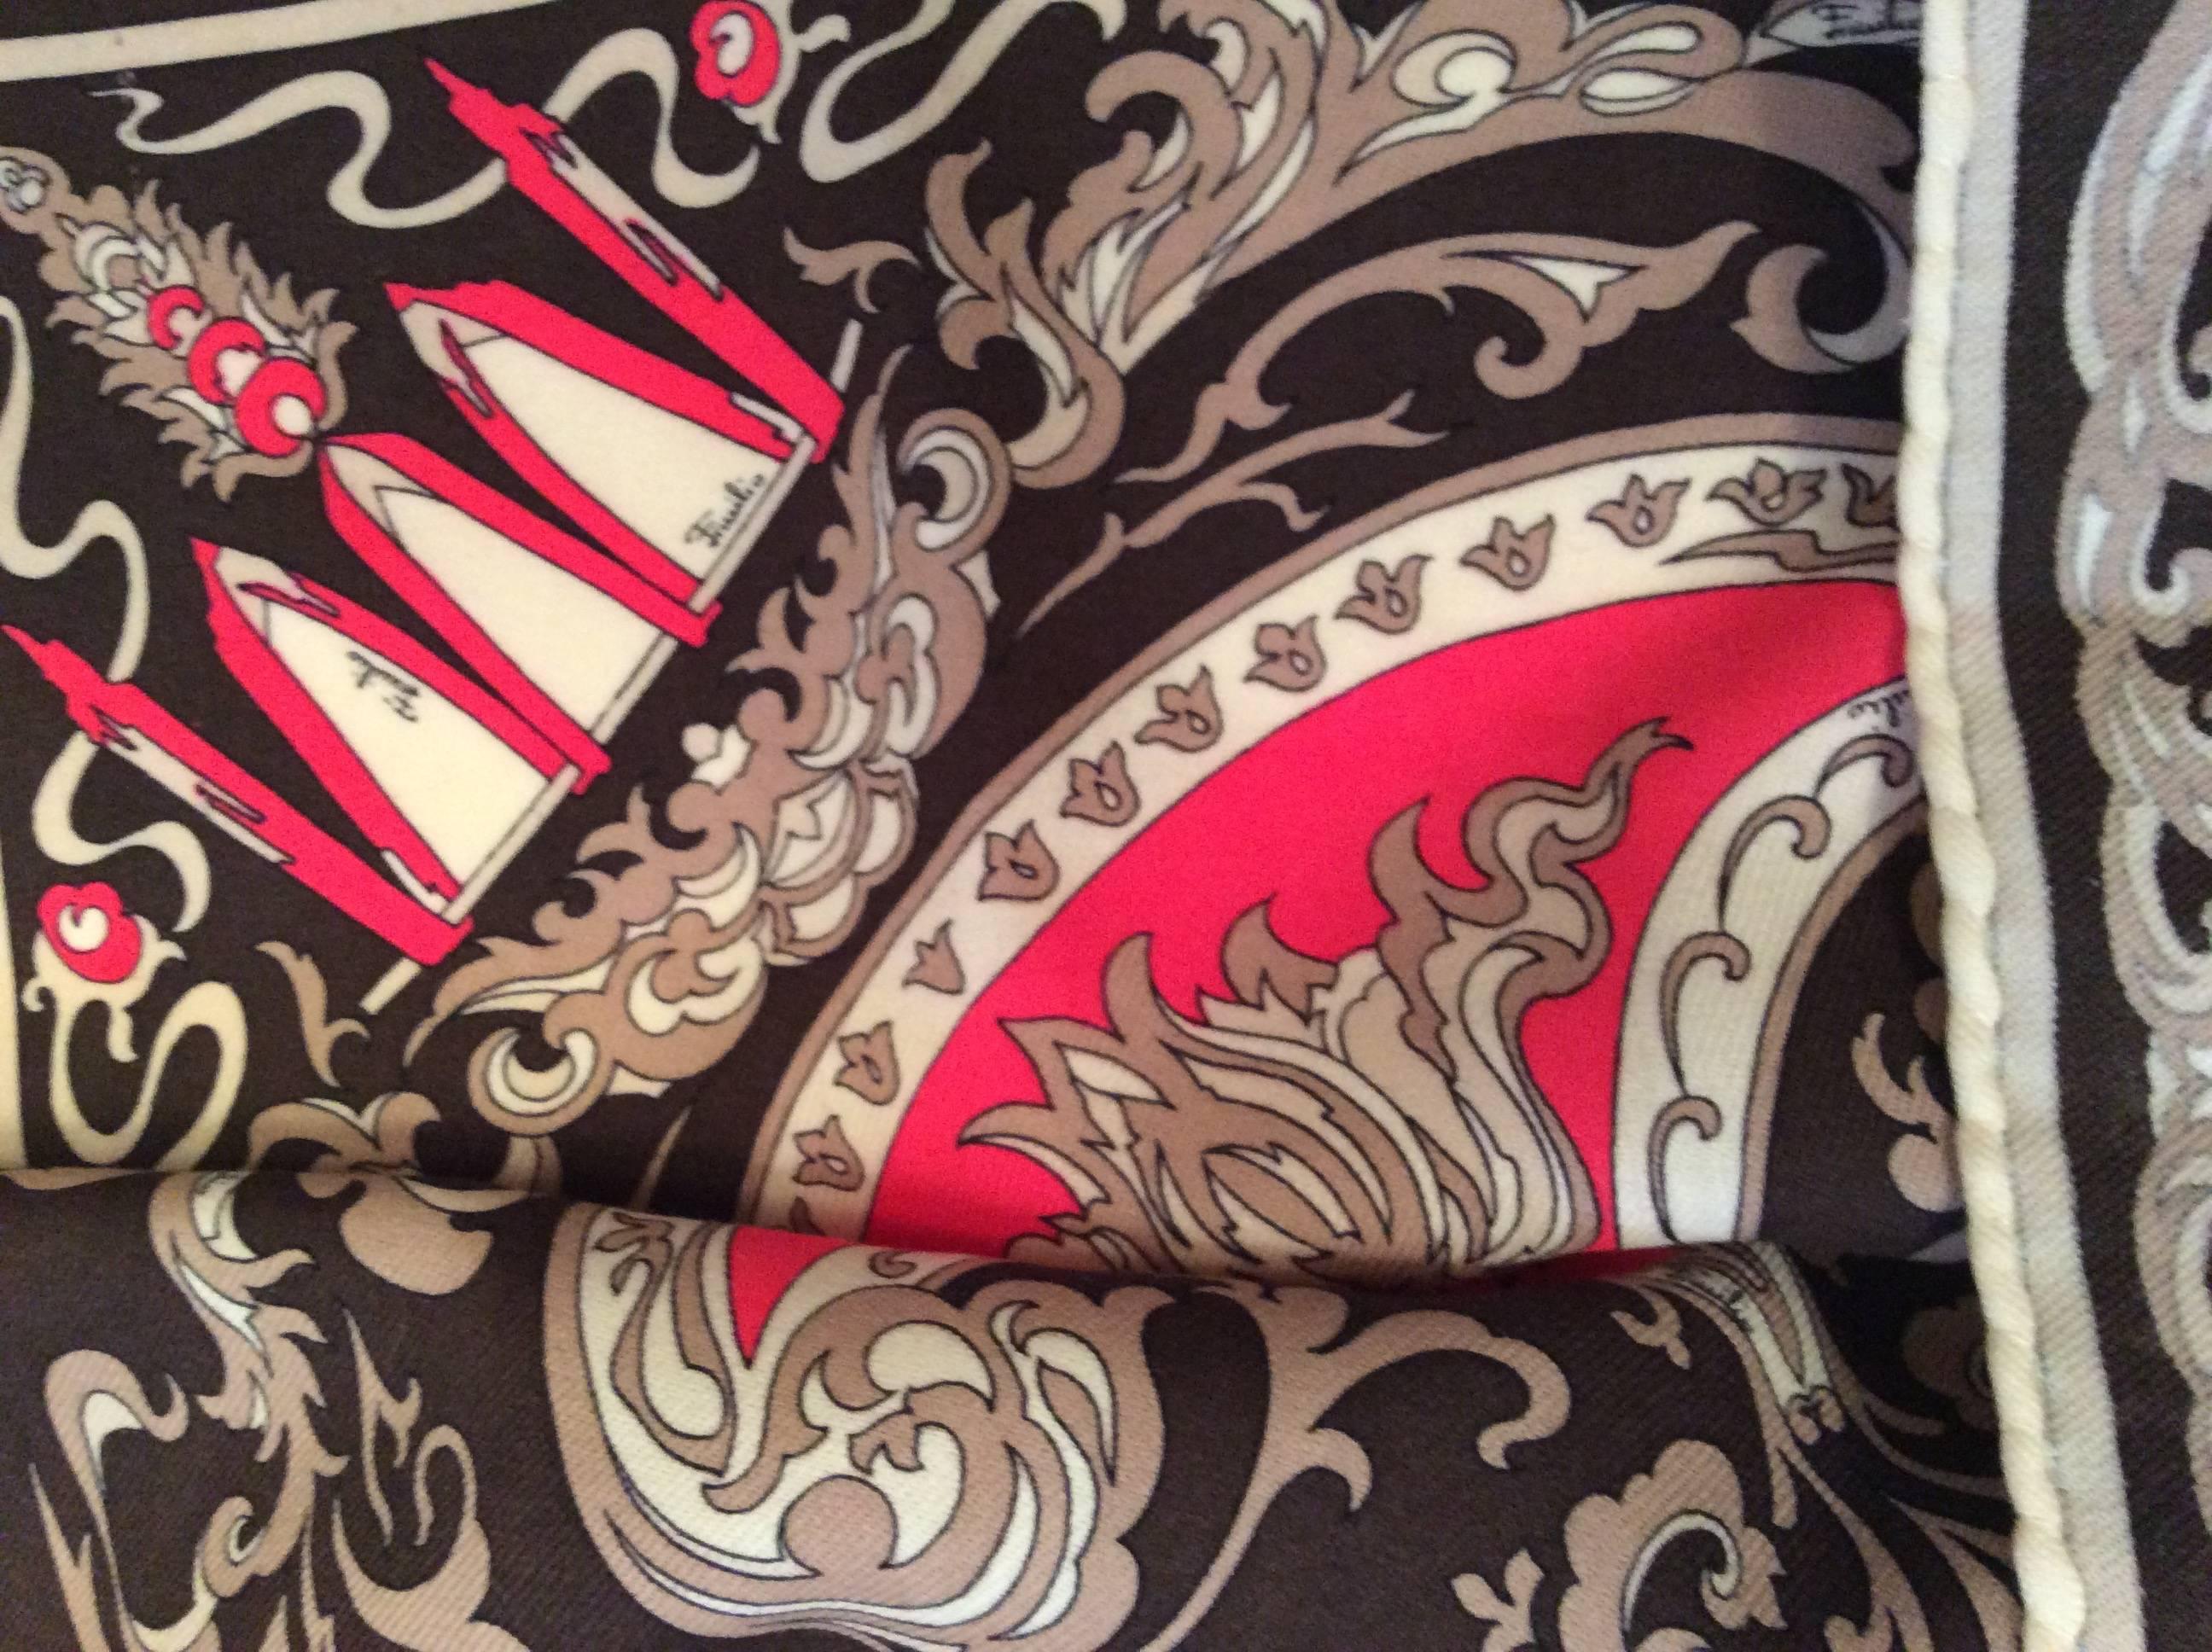 Vintage Emilio Pucci Scarf - Wool - 1960's In Good Condition For Sale In Boca Raton, FL